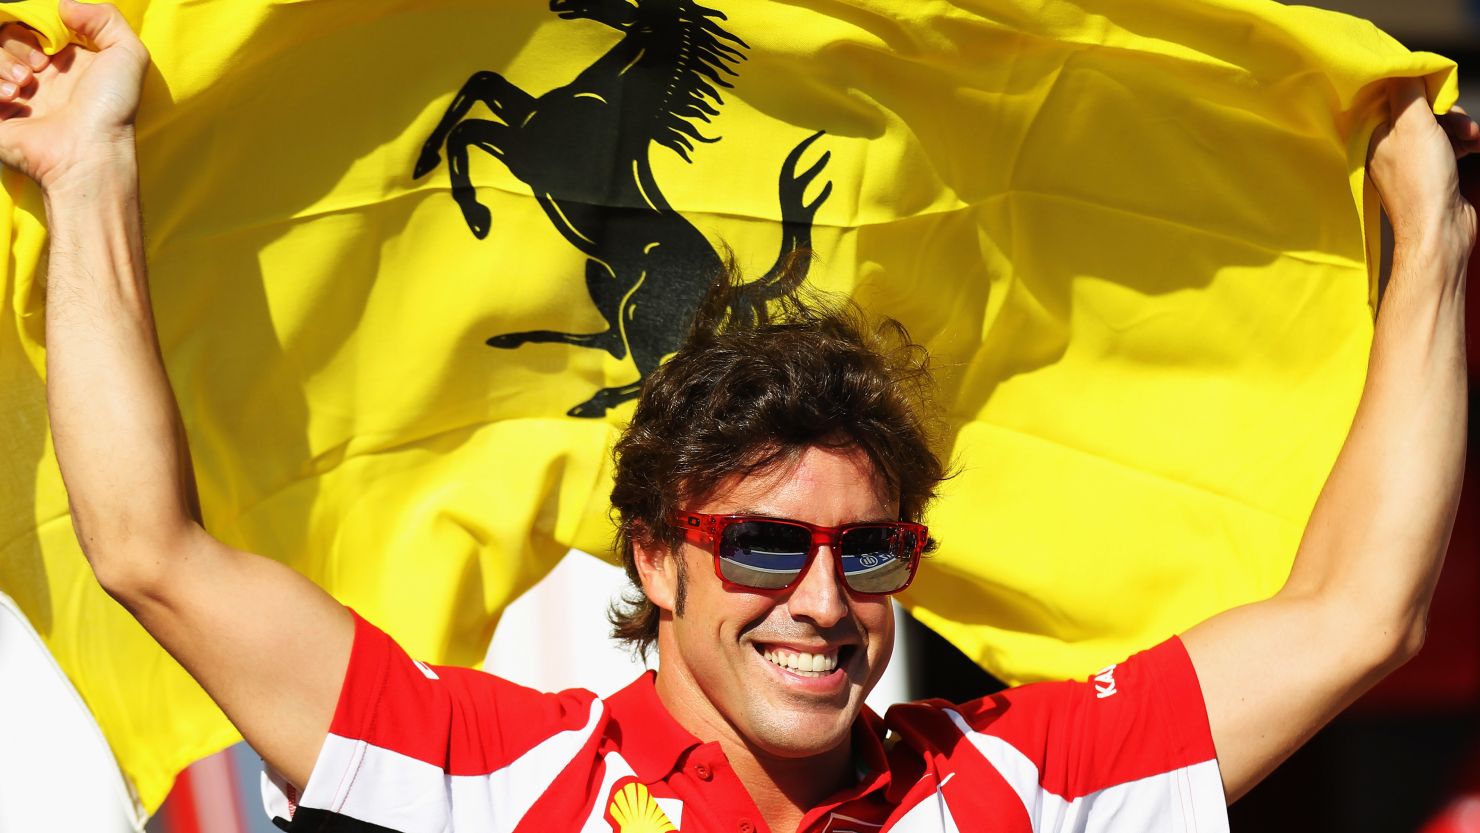 Ferrari's Fernando Alonso is the only driver to win more than one race in the current Formula One season